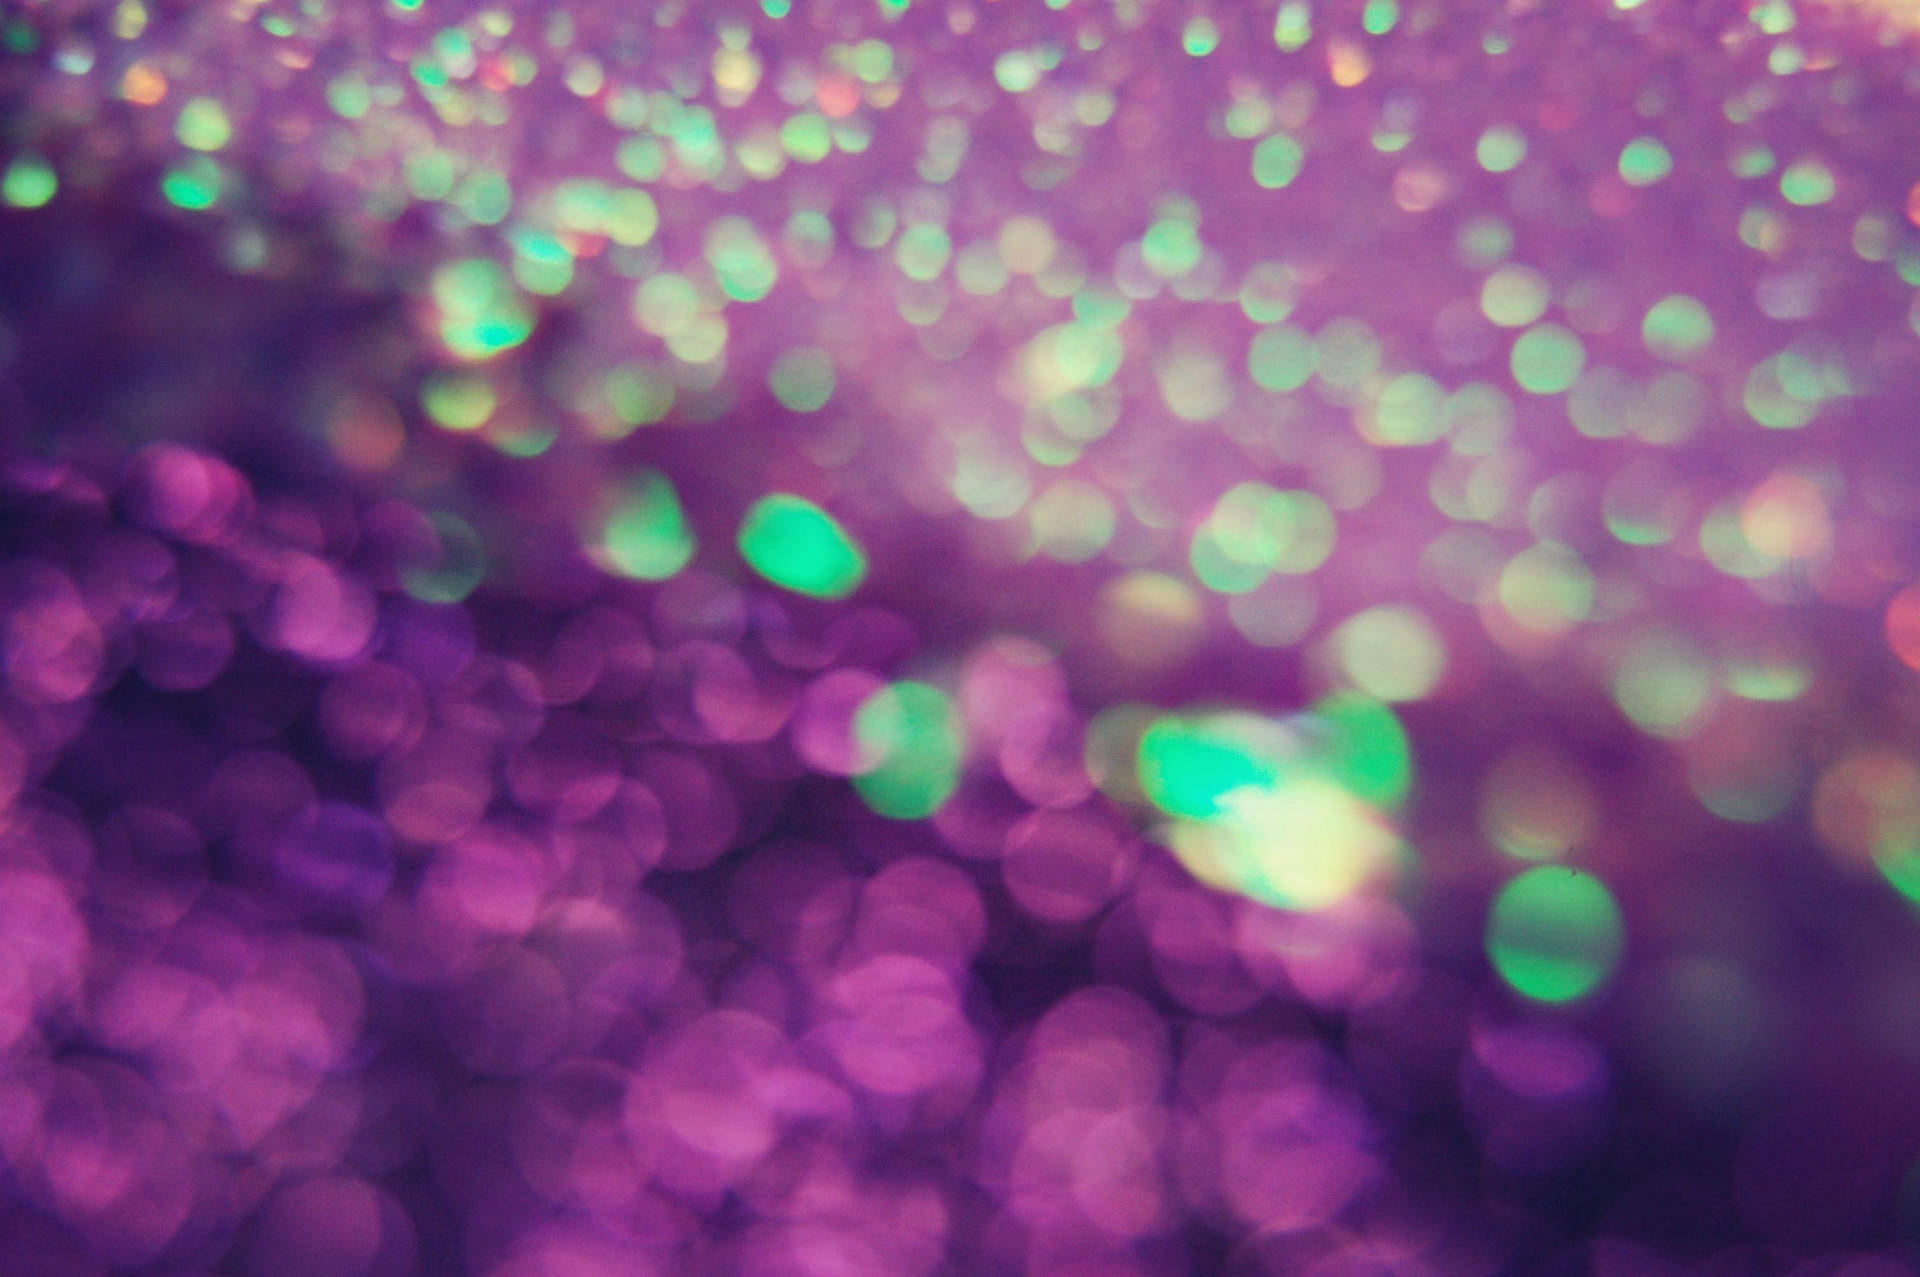 Glitter 3008X2000 Wallpaper and Background Image